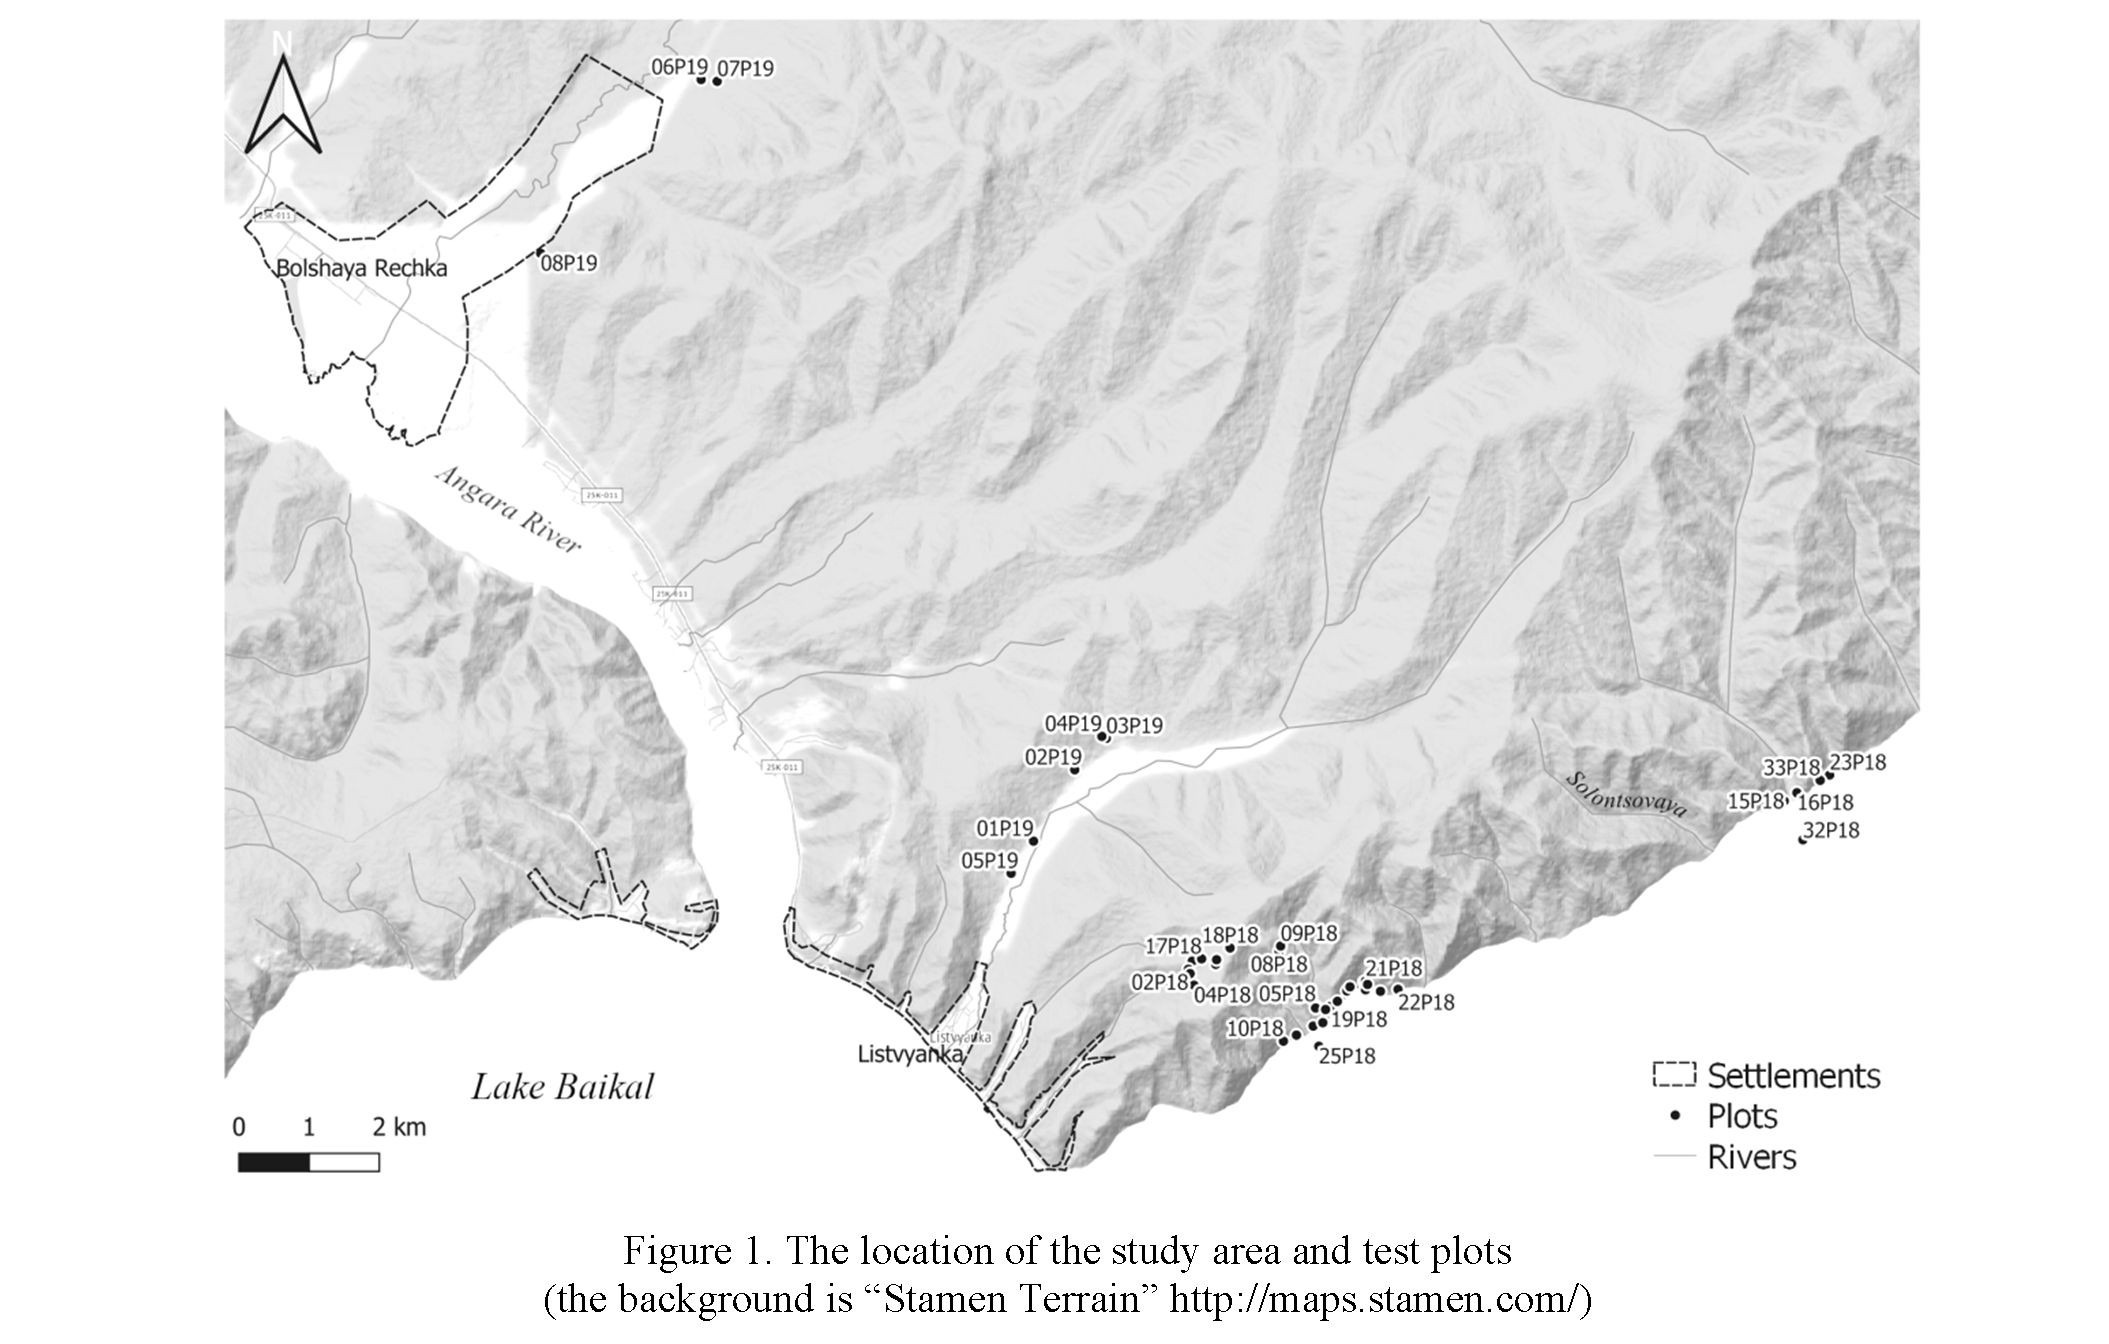 Geosystems of the Primorsky ridge (Baikal region) — classification and mapping